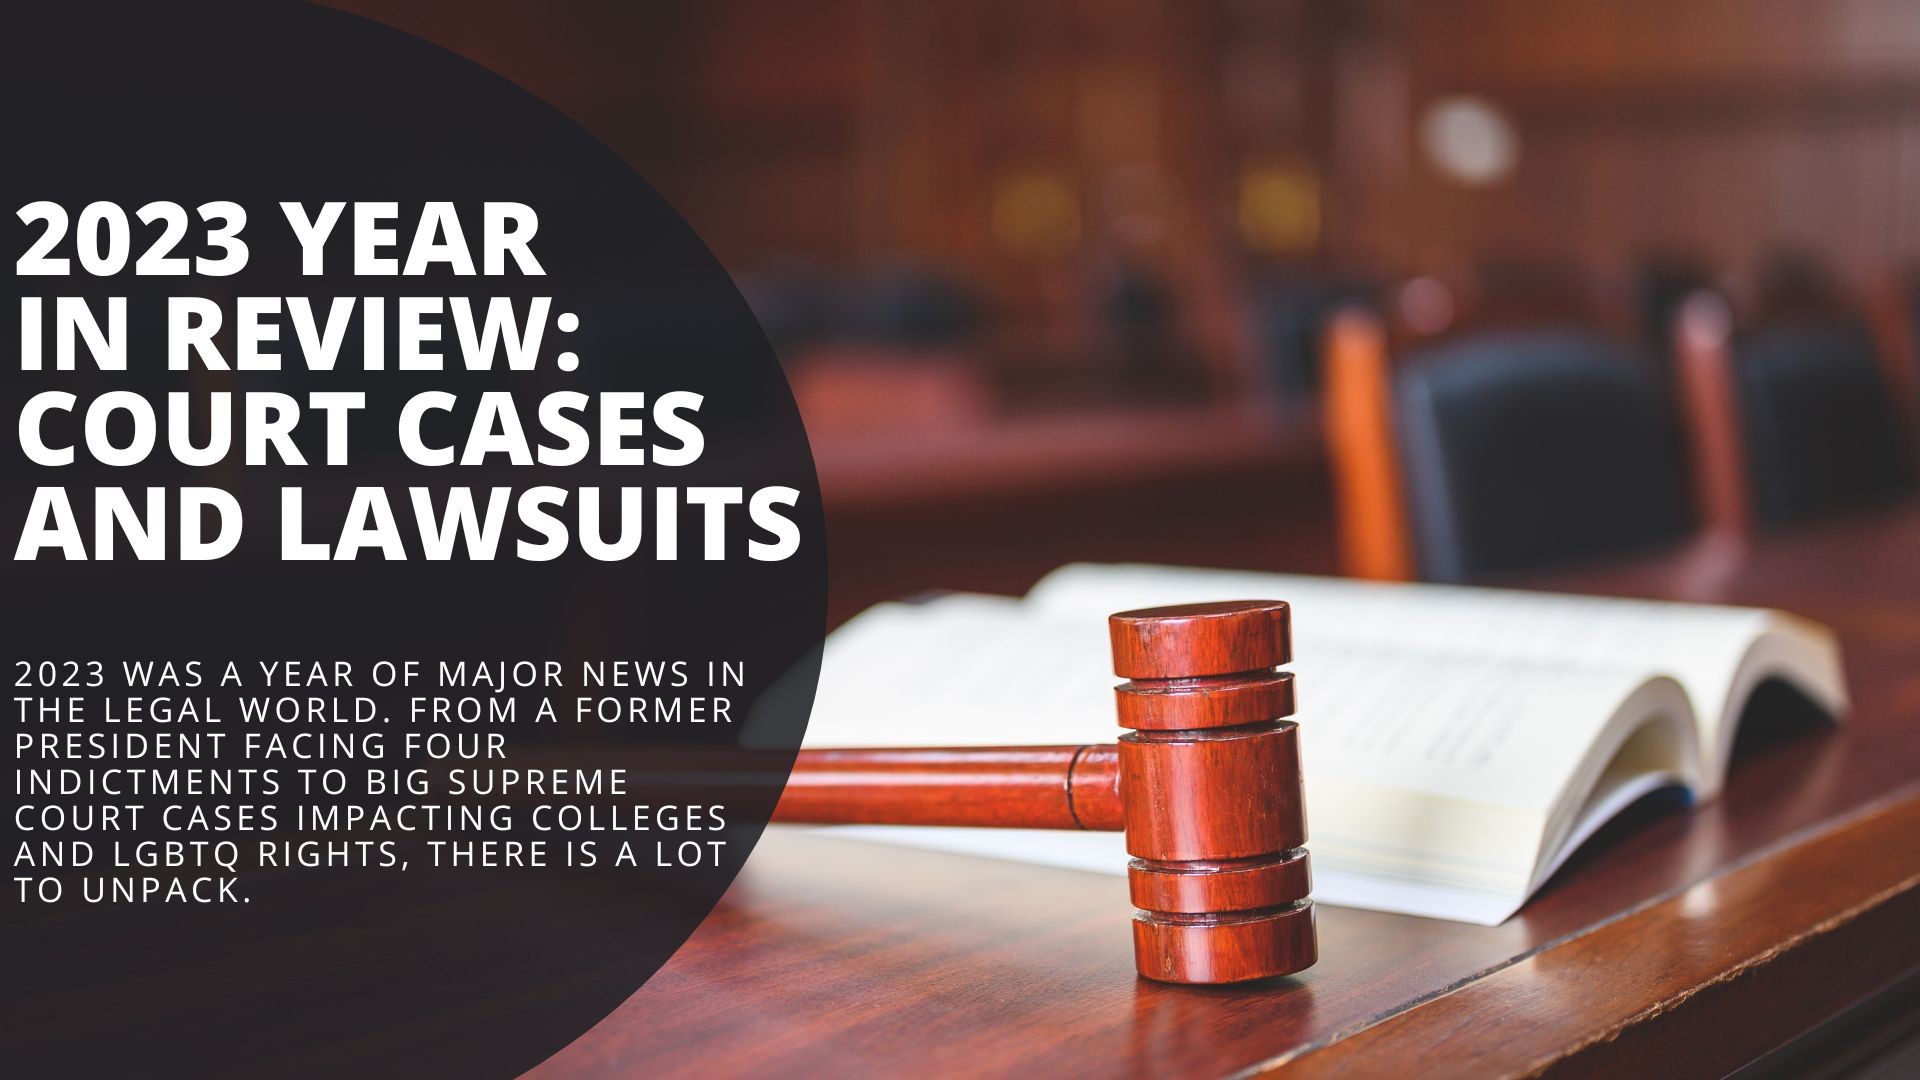 This year in review takes a look back at some of the big court cases and lawsuits in 2023.